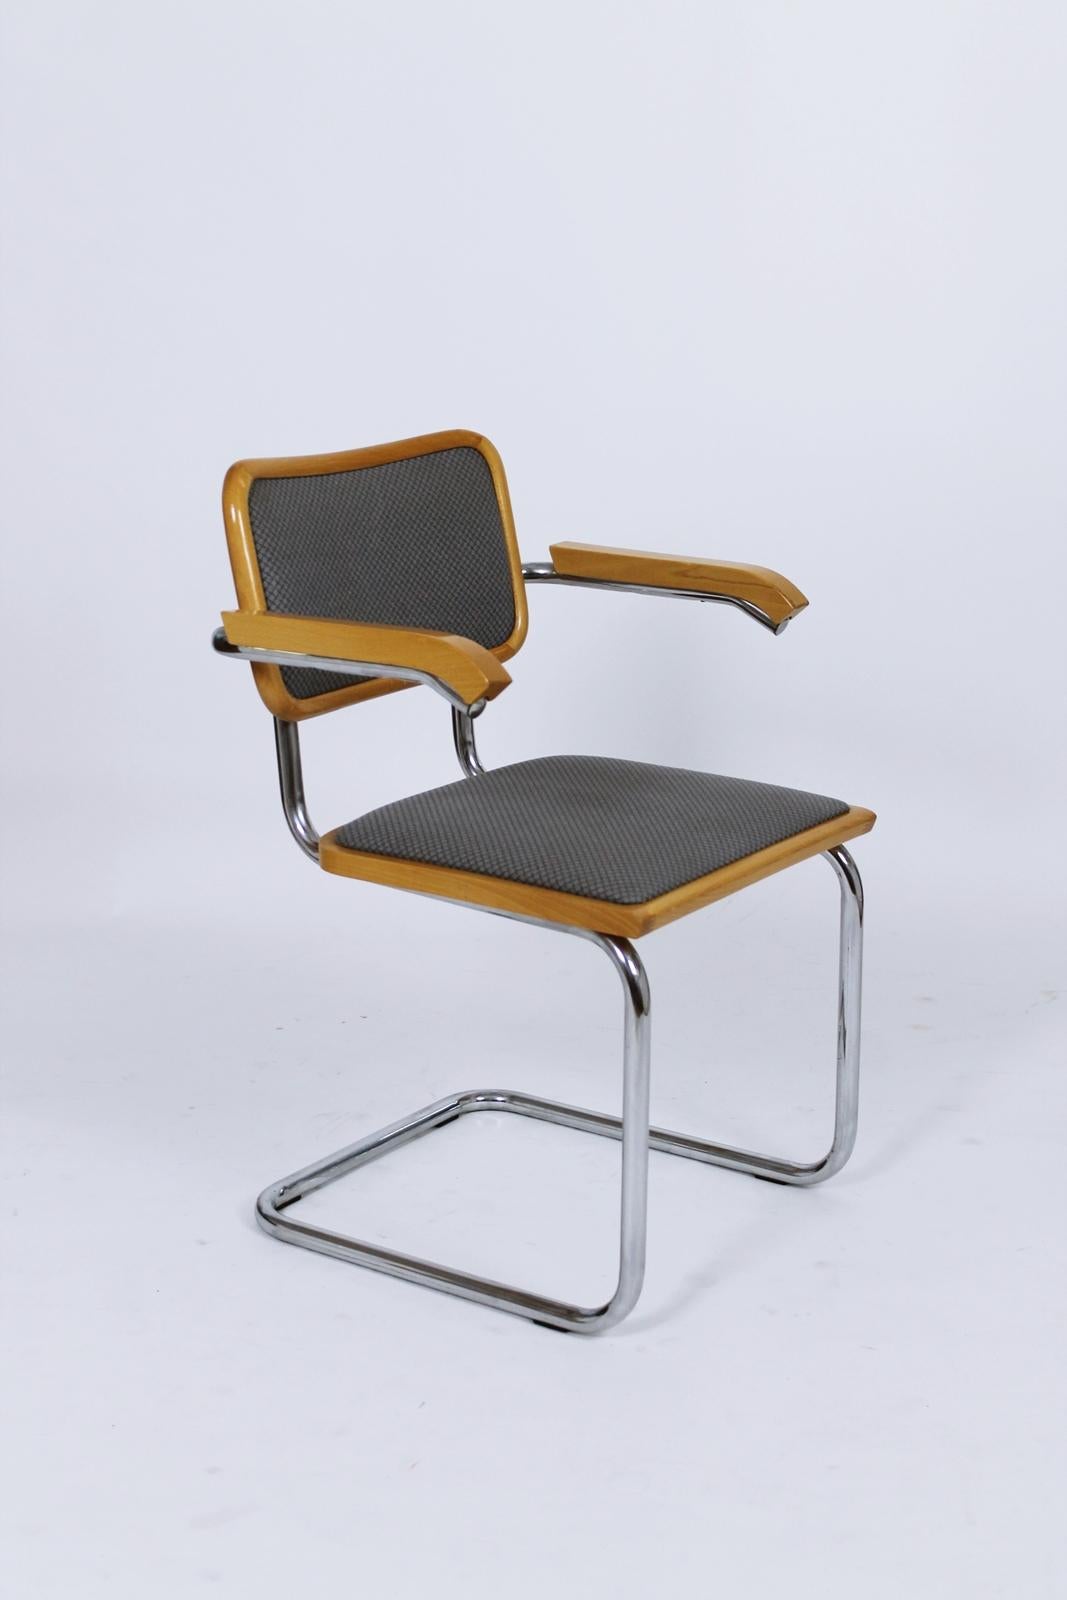 Bauhaus Pair of Grey Cesca Cantilever Armchairs by Marcel Breuer 1990s Made in Italy For Sale